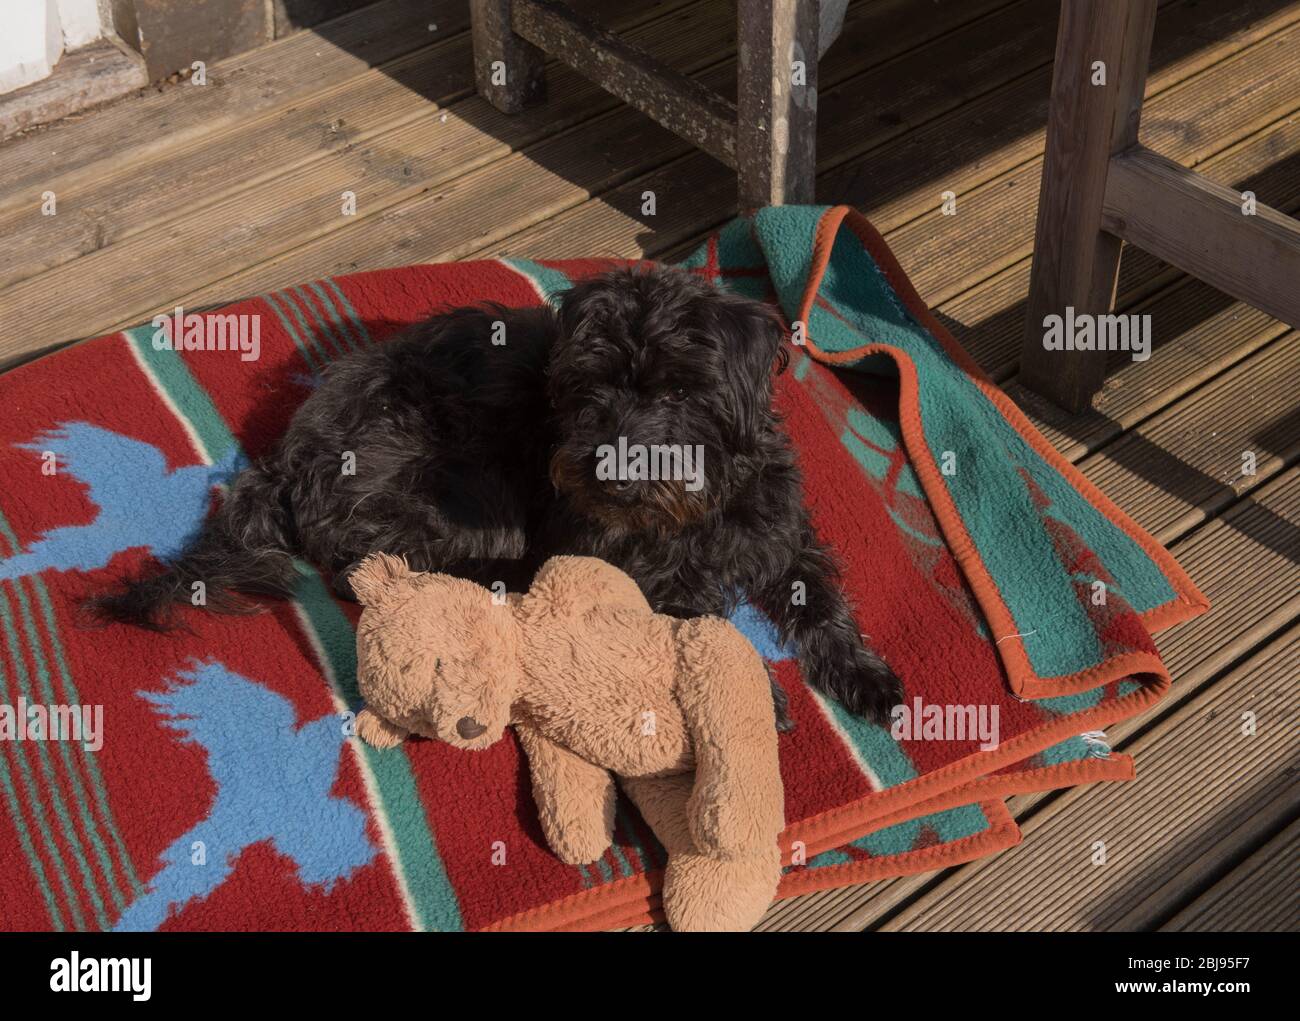 Black Schnoodle Dog (Miniature Poodle and Miniature Schnauzer Cross) Lying on his Bed with a Teddy Bear in a Garden in Rural Devon, England, UK Stock Photo